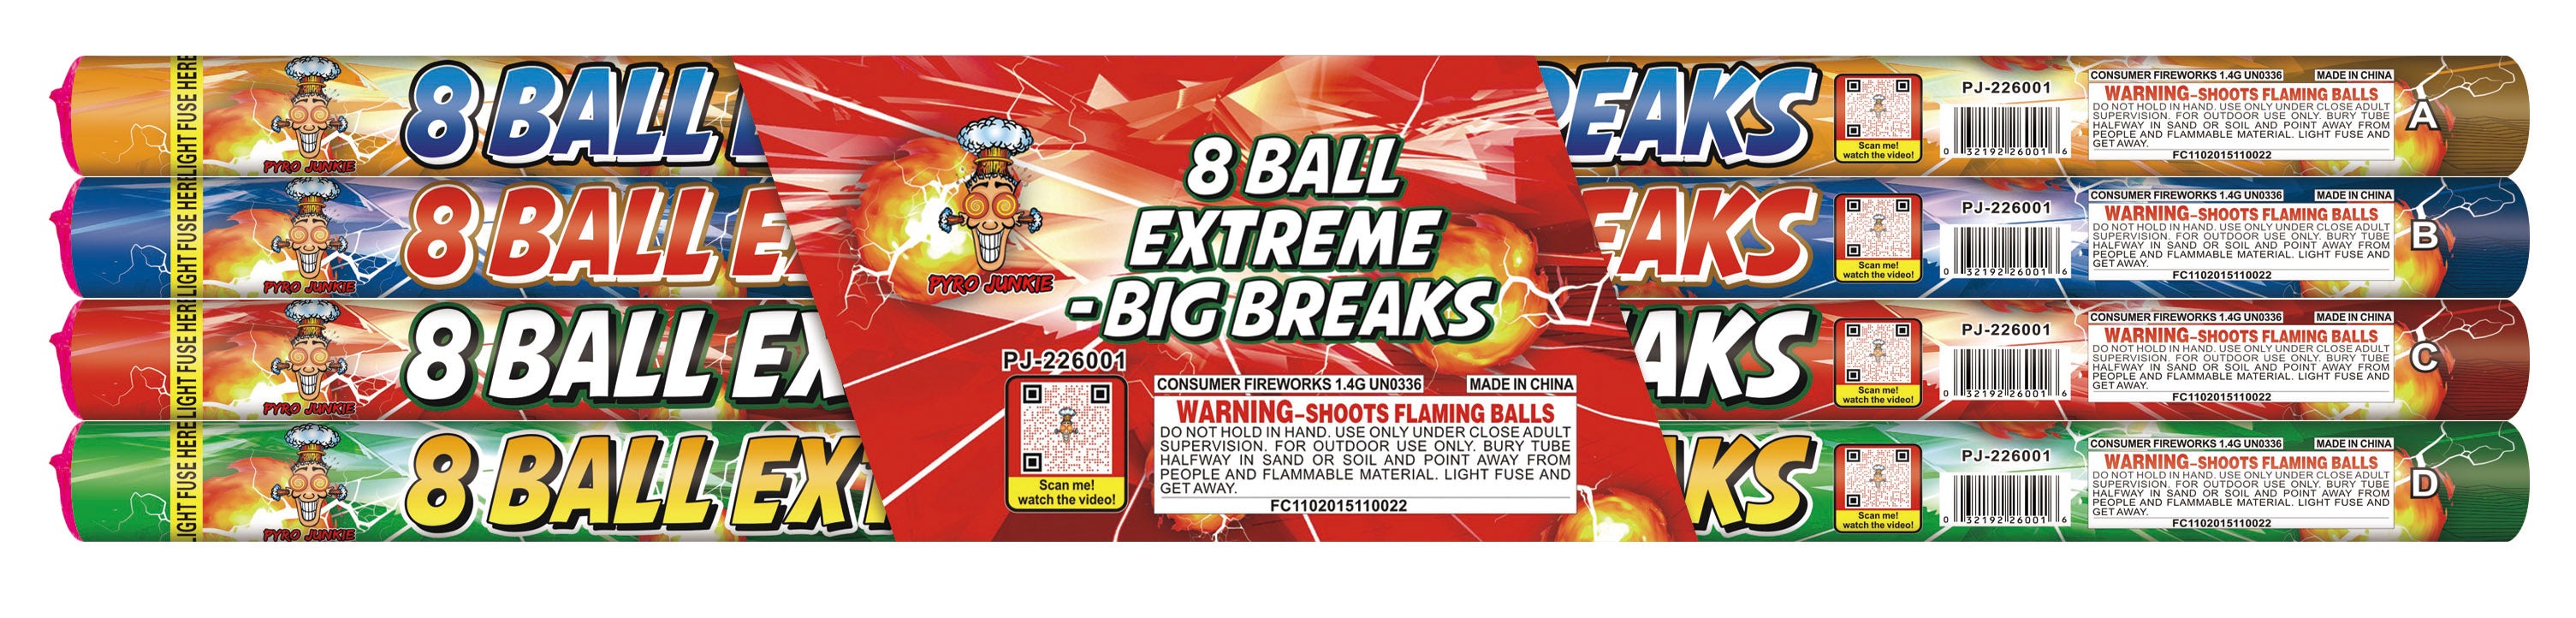 8 Ball Extreme By PJ (Case - 24 Units)